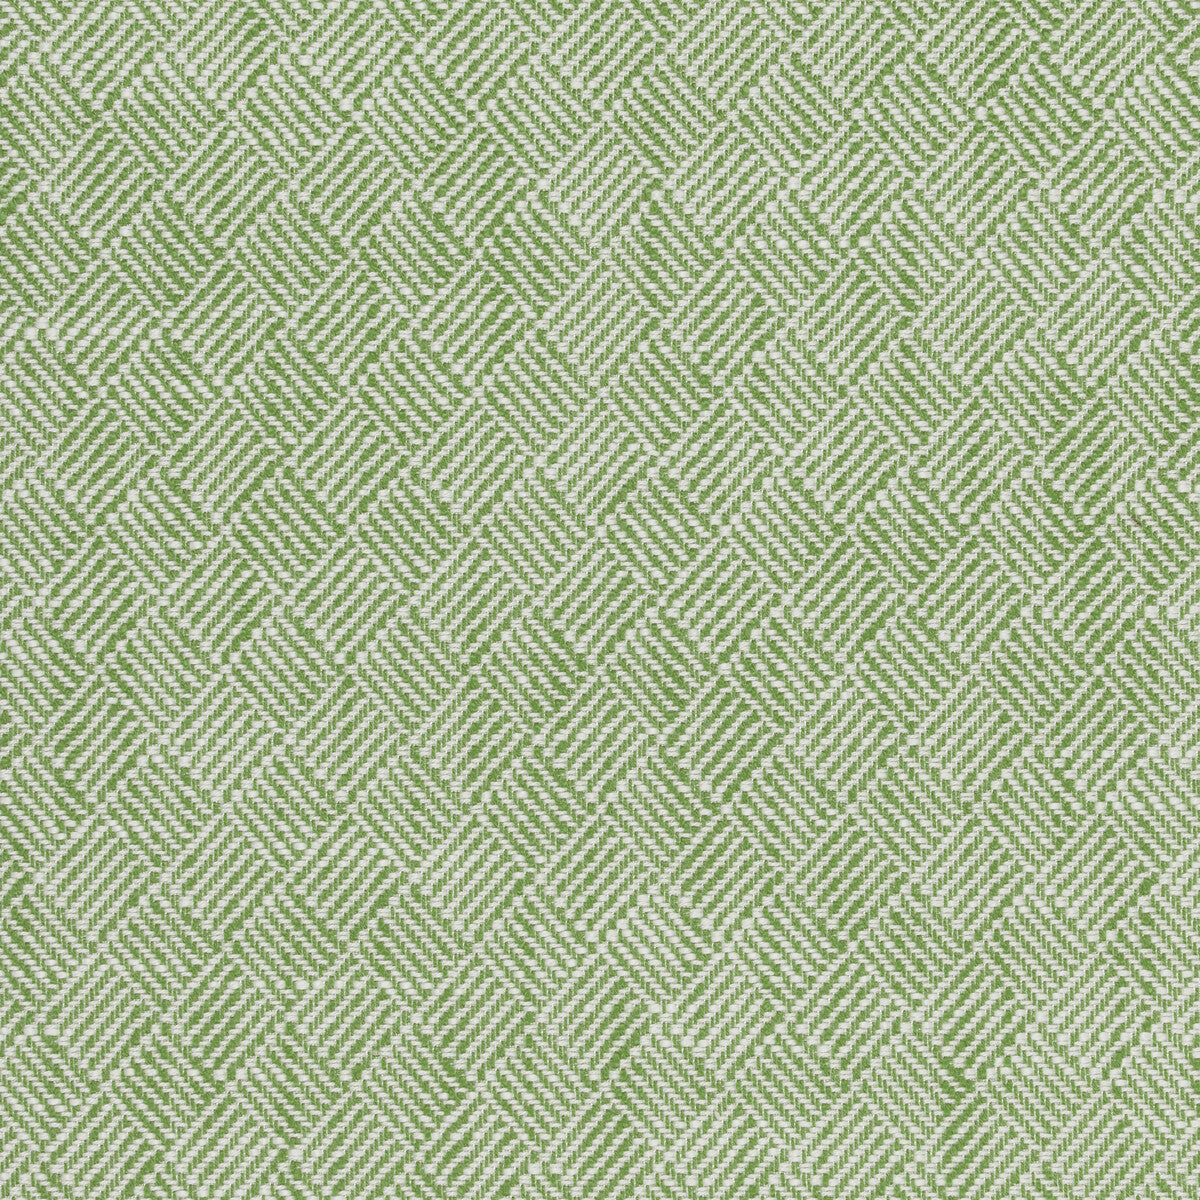 Kravet Design fabric in 36088-3 color - pattern 36088.3.0 - by Kravet Design in the Inside Out Performance Fabrics collection